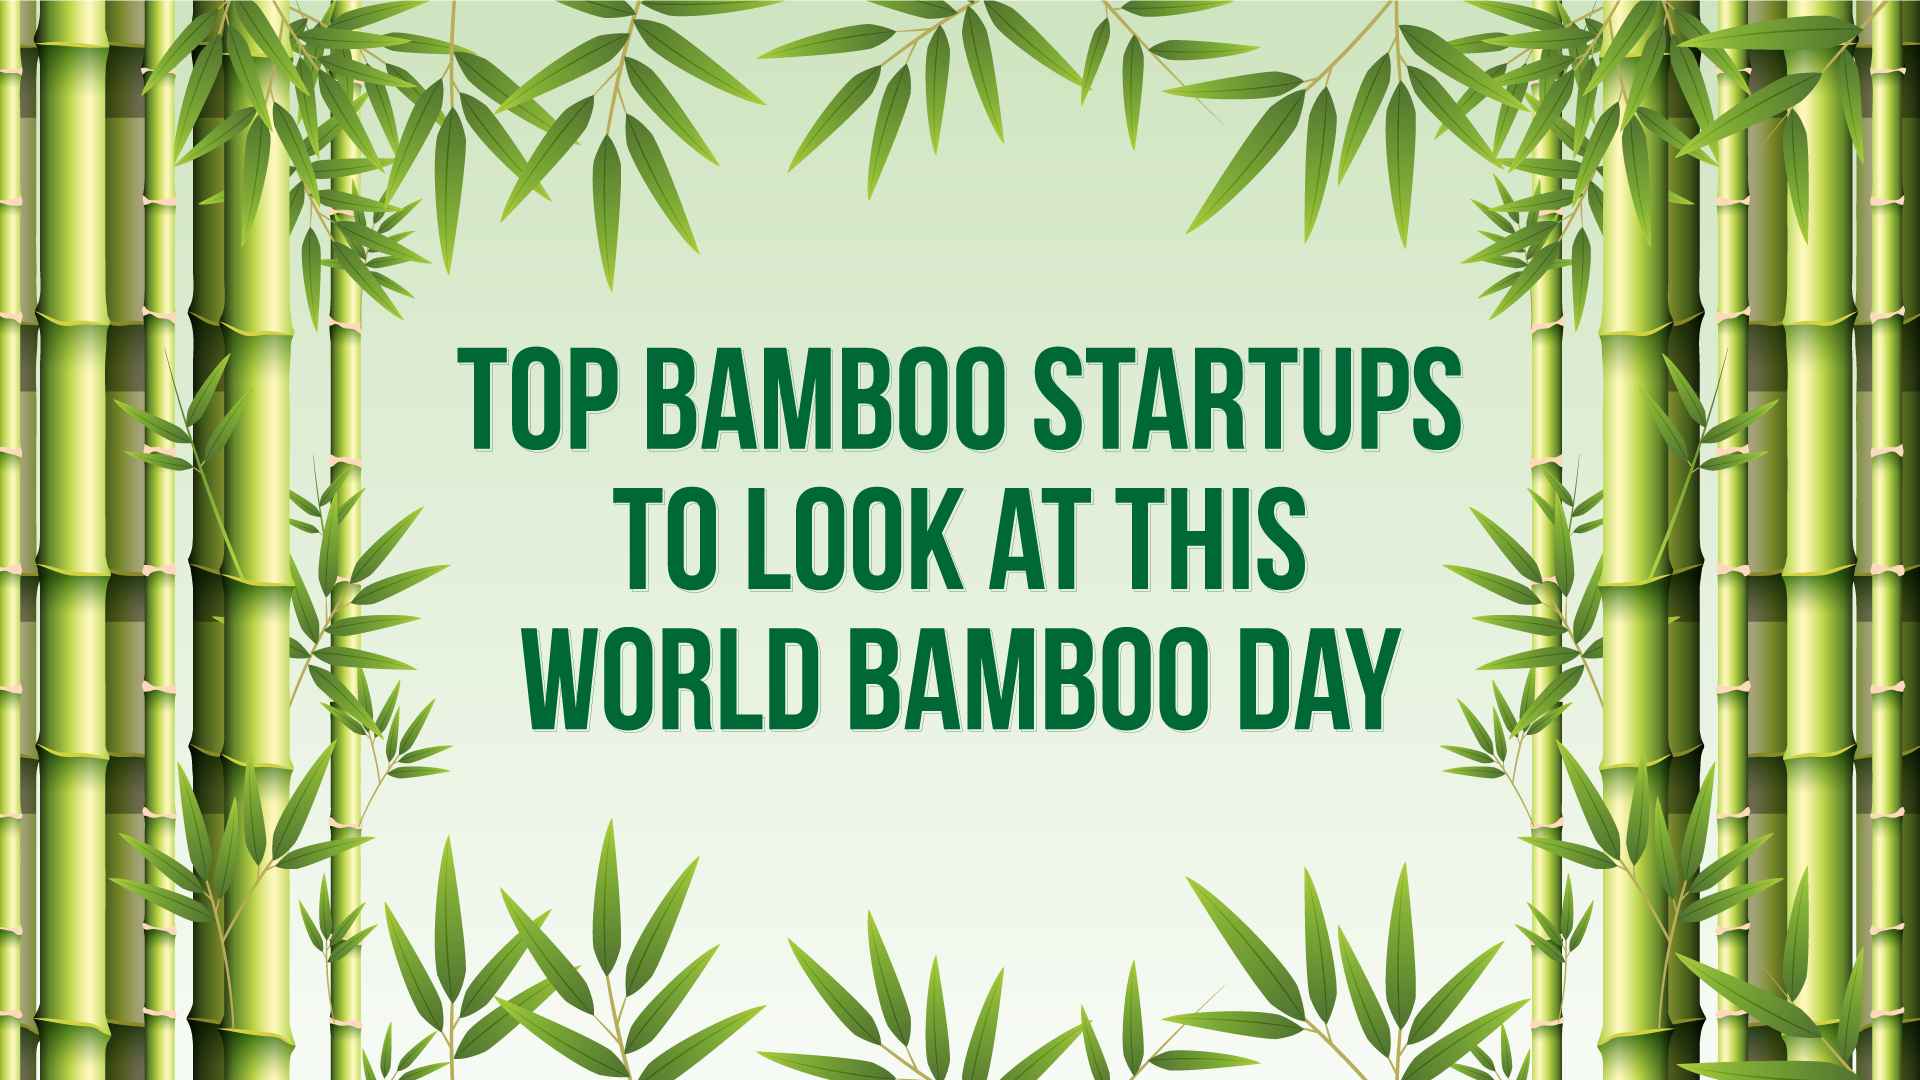 Celebrating world bamboo day: Discover top startups promoting sustainability